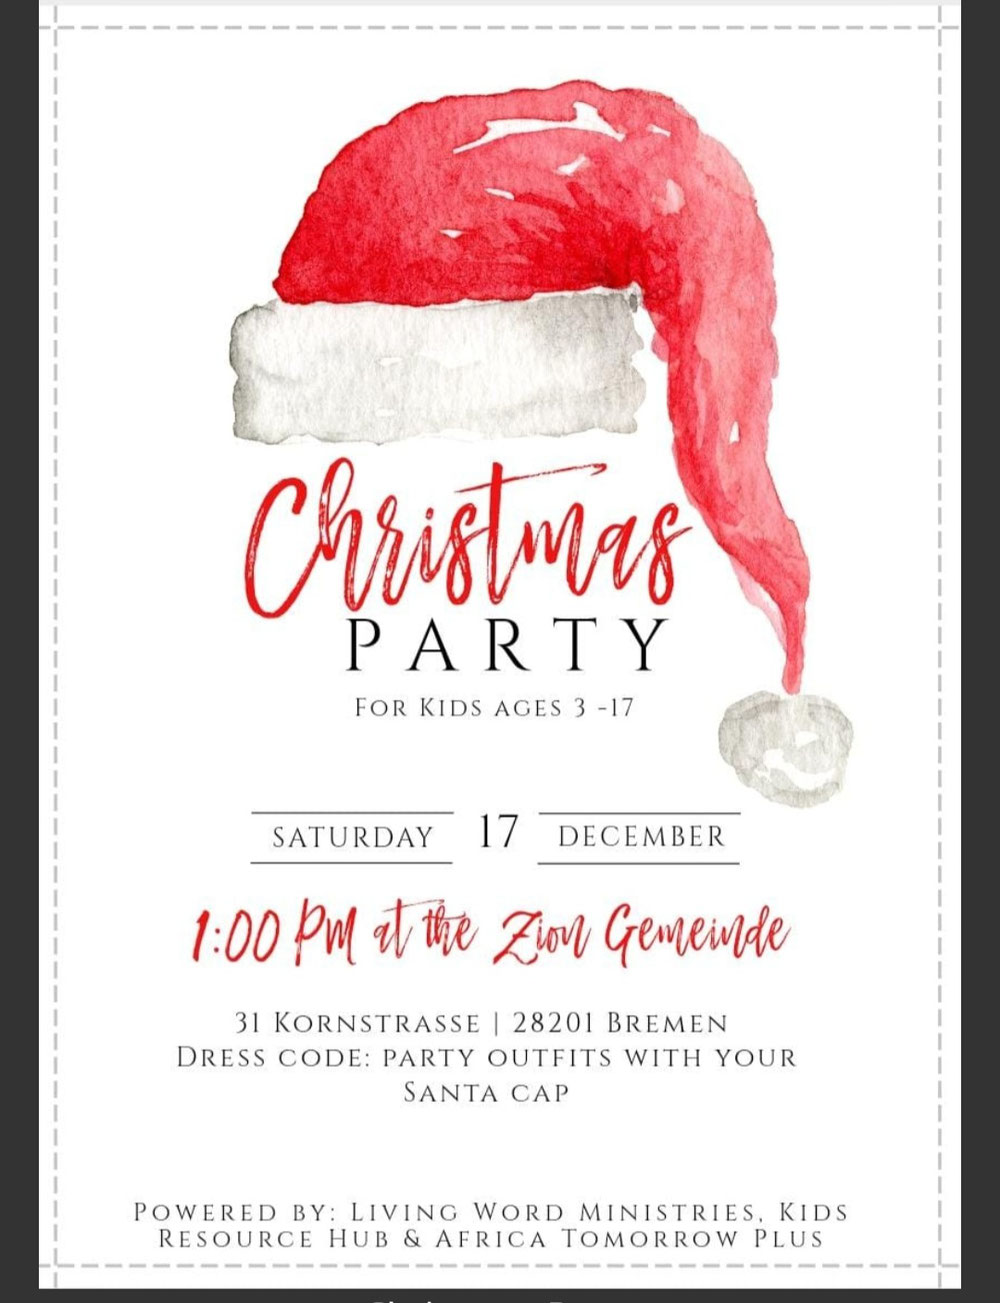 Christmas Party for age 3-17 